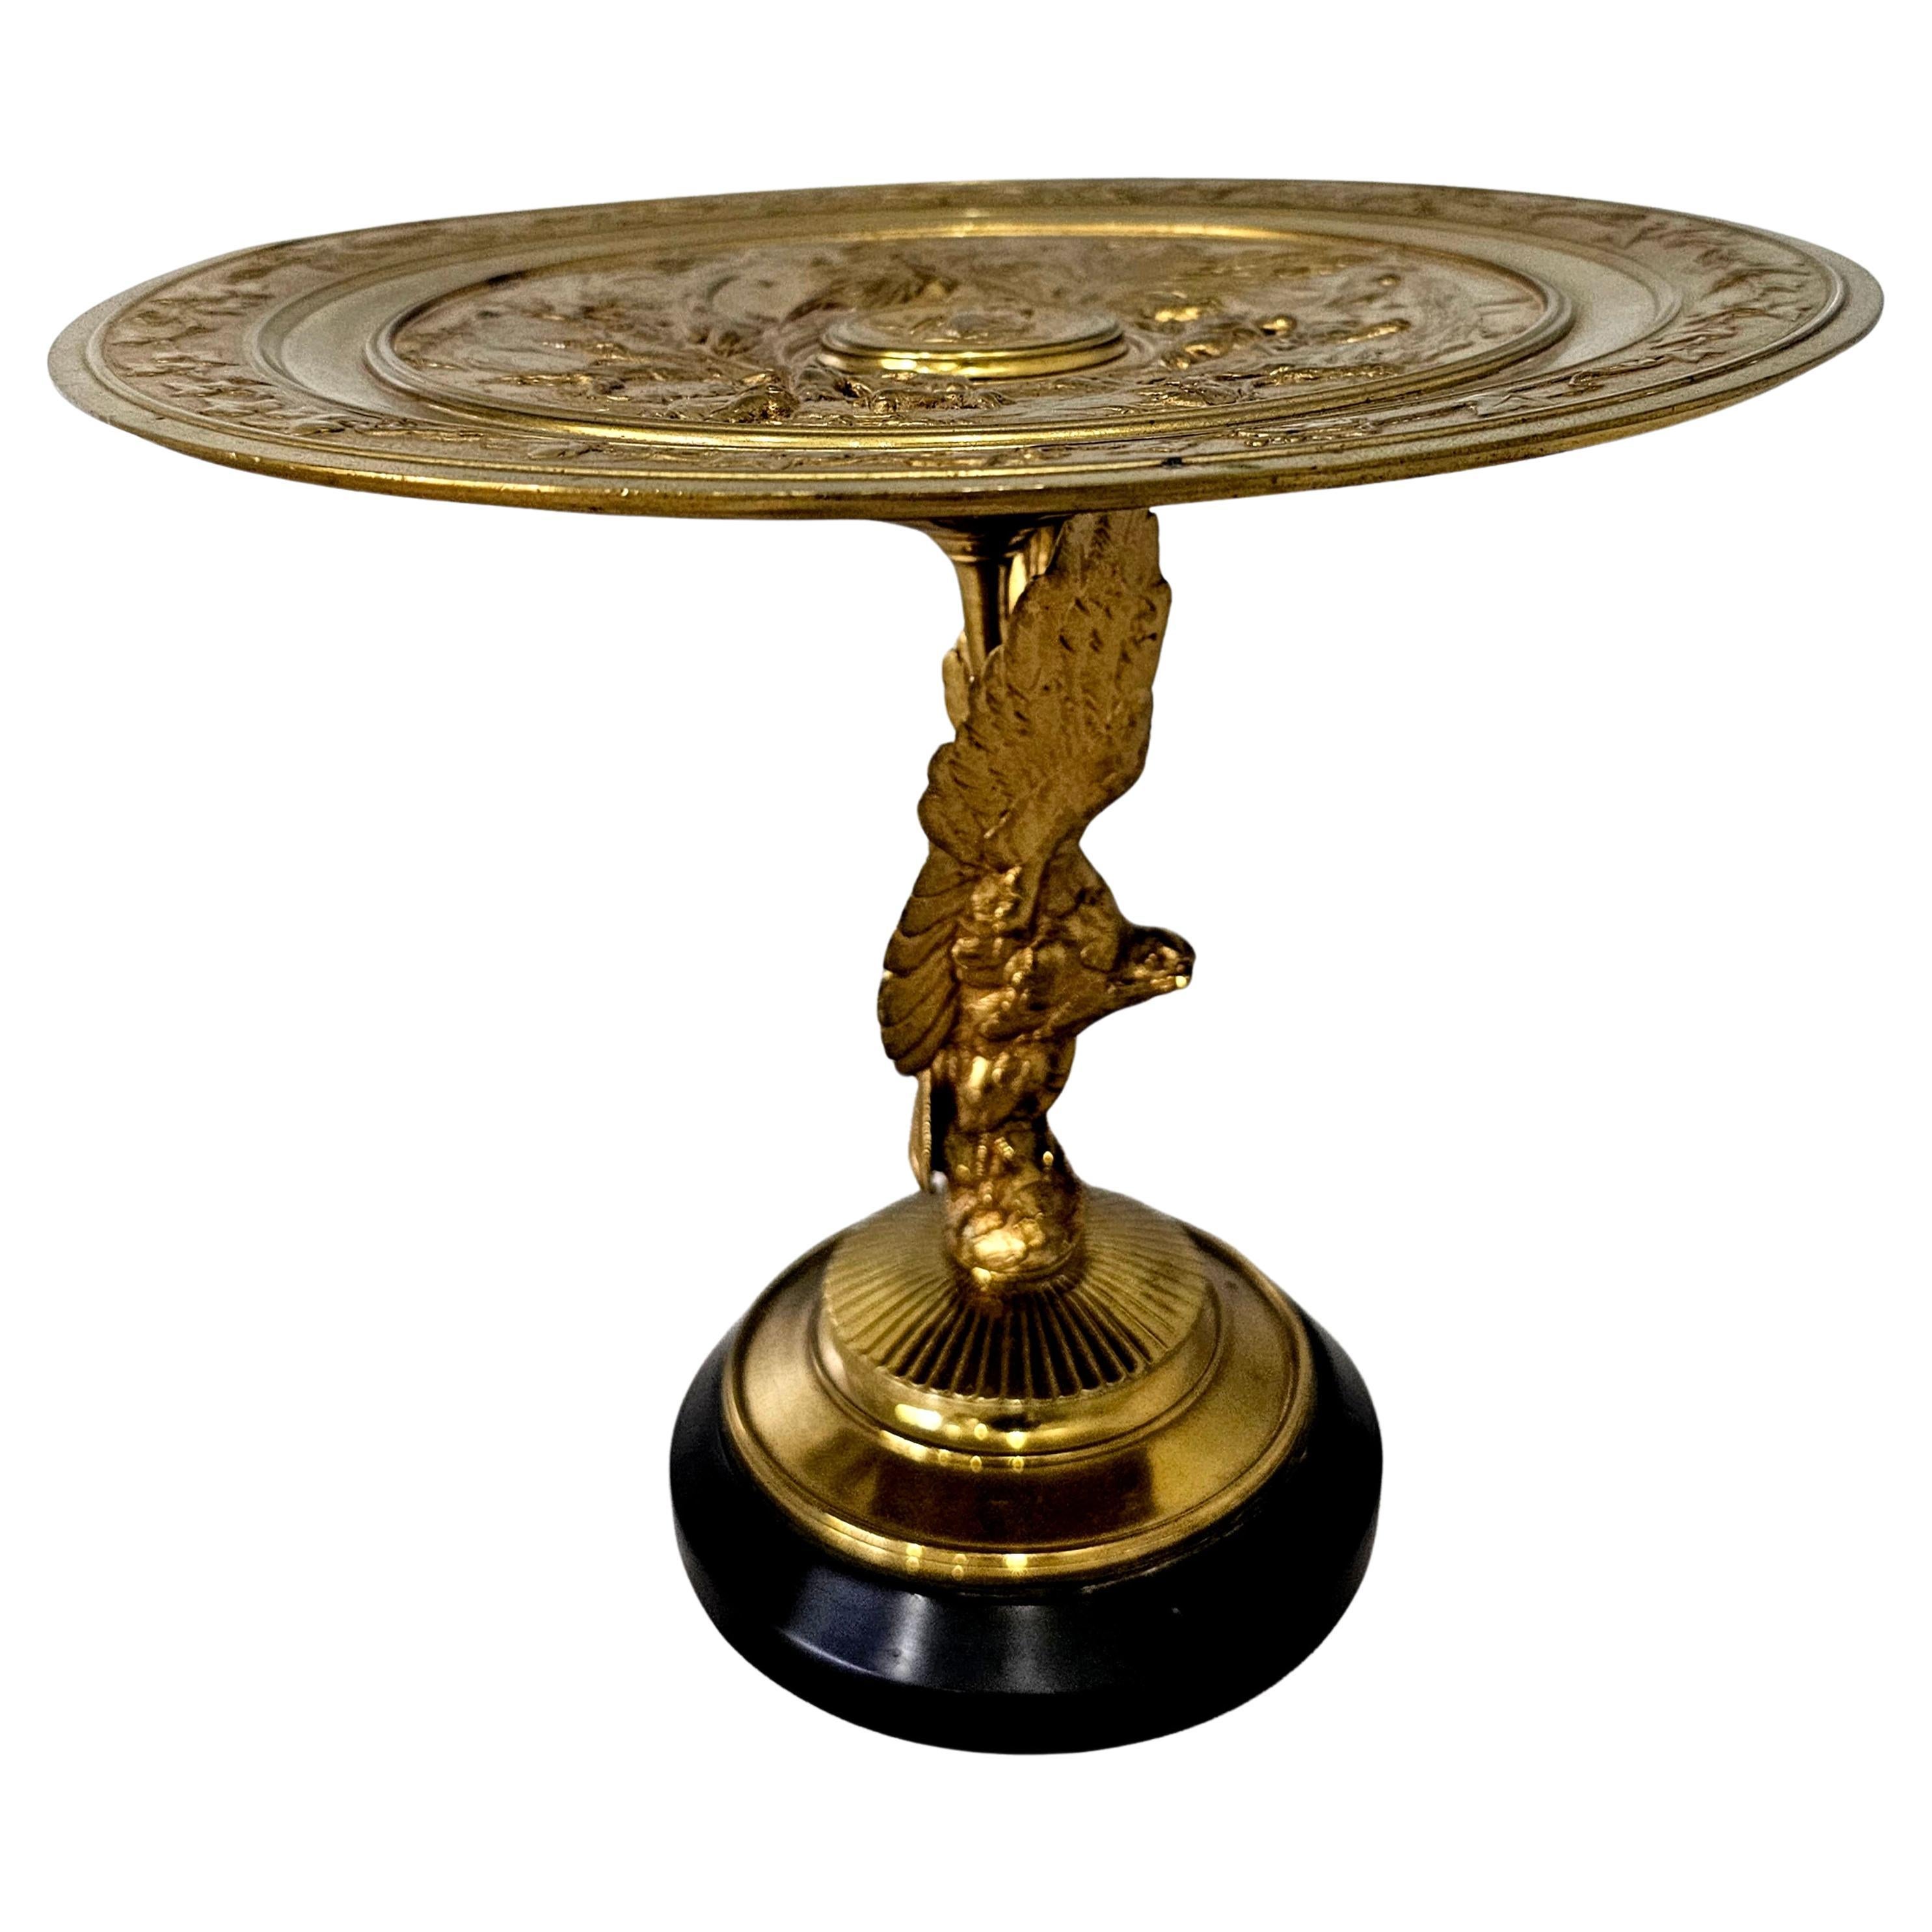 19th C. Renaissance Gilt Bronze Sculptural Tazza Signed E. Cana 1845-1895 French For Sale